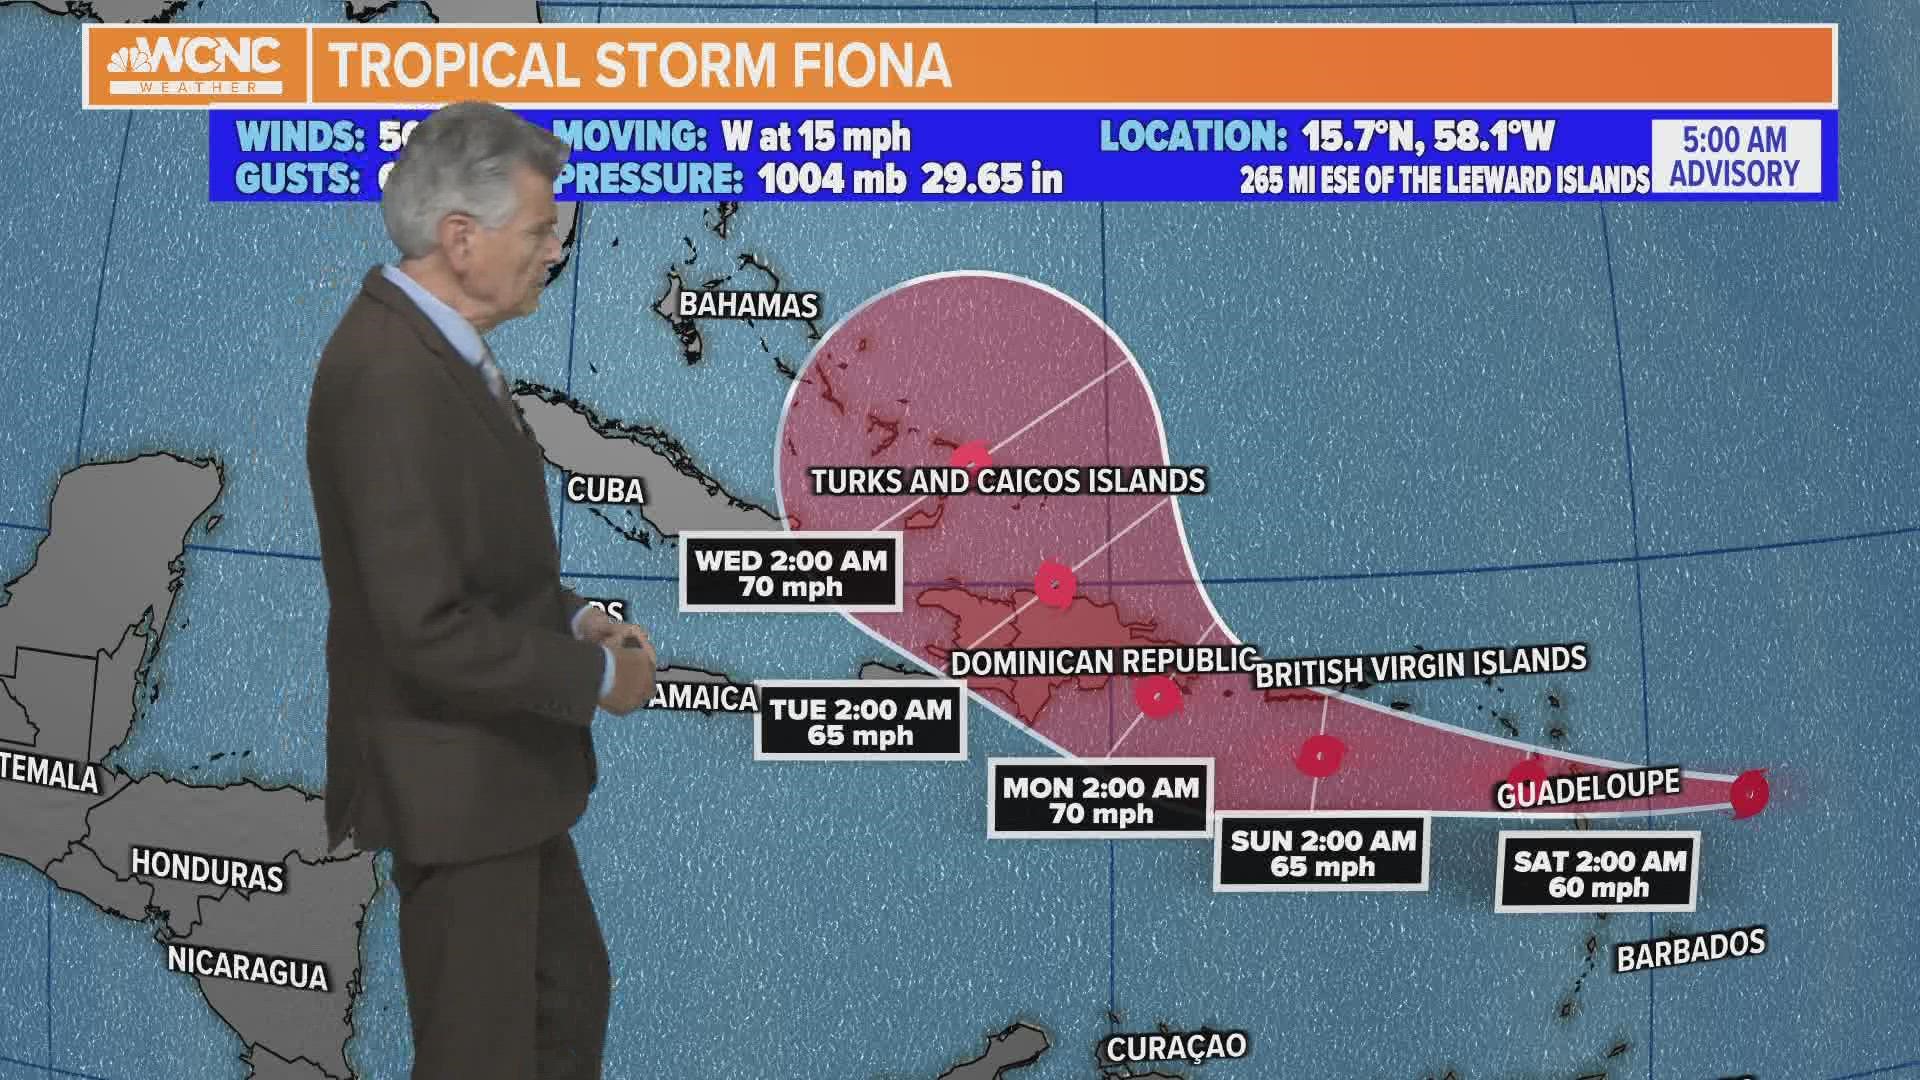 Tropical Storm Fiona has sustained winds of 50 mph and is expected to move west toward the Dominican Republic by early Monday morning.